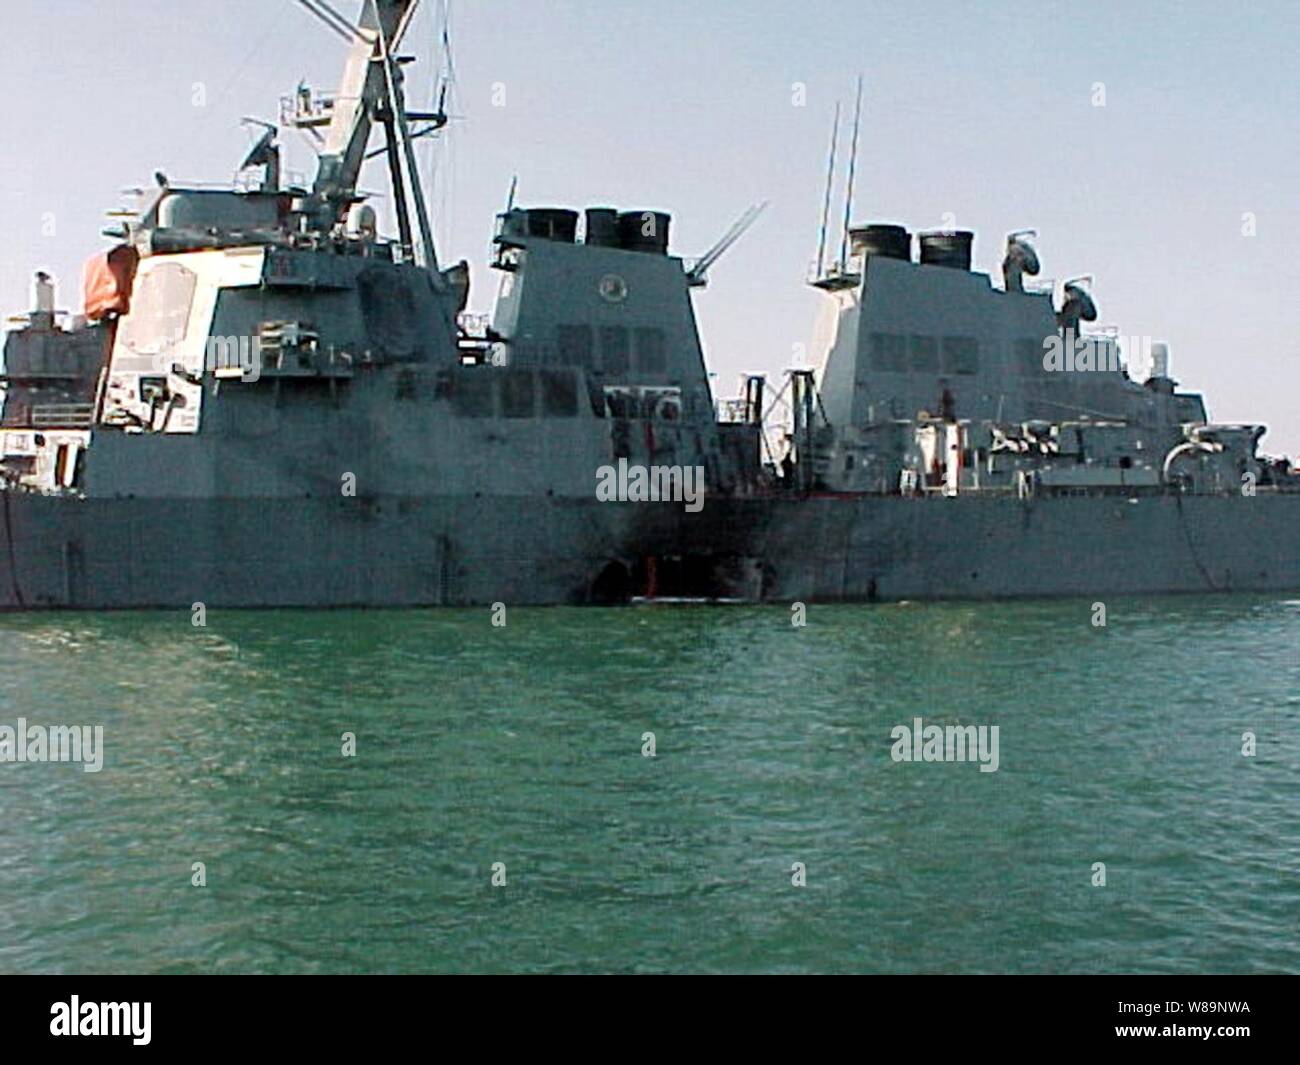 ADEN, Yemen (October 12, 2000) -- Port side view showing the damage sustained by the Arleigh Burke class guided missile destroyer USS Cole (DDG 67) after a suspected terrorist bomb exploded during a refueling operation in the port of Aden.  USS Cole is on a regular scheduled six-month deployment. Stock Photo